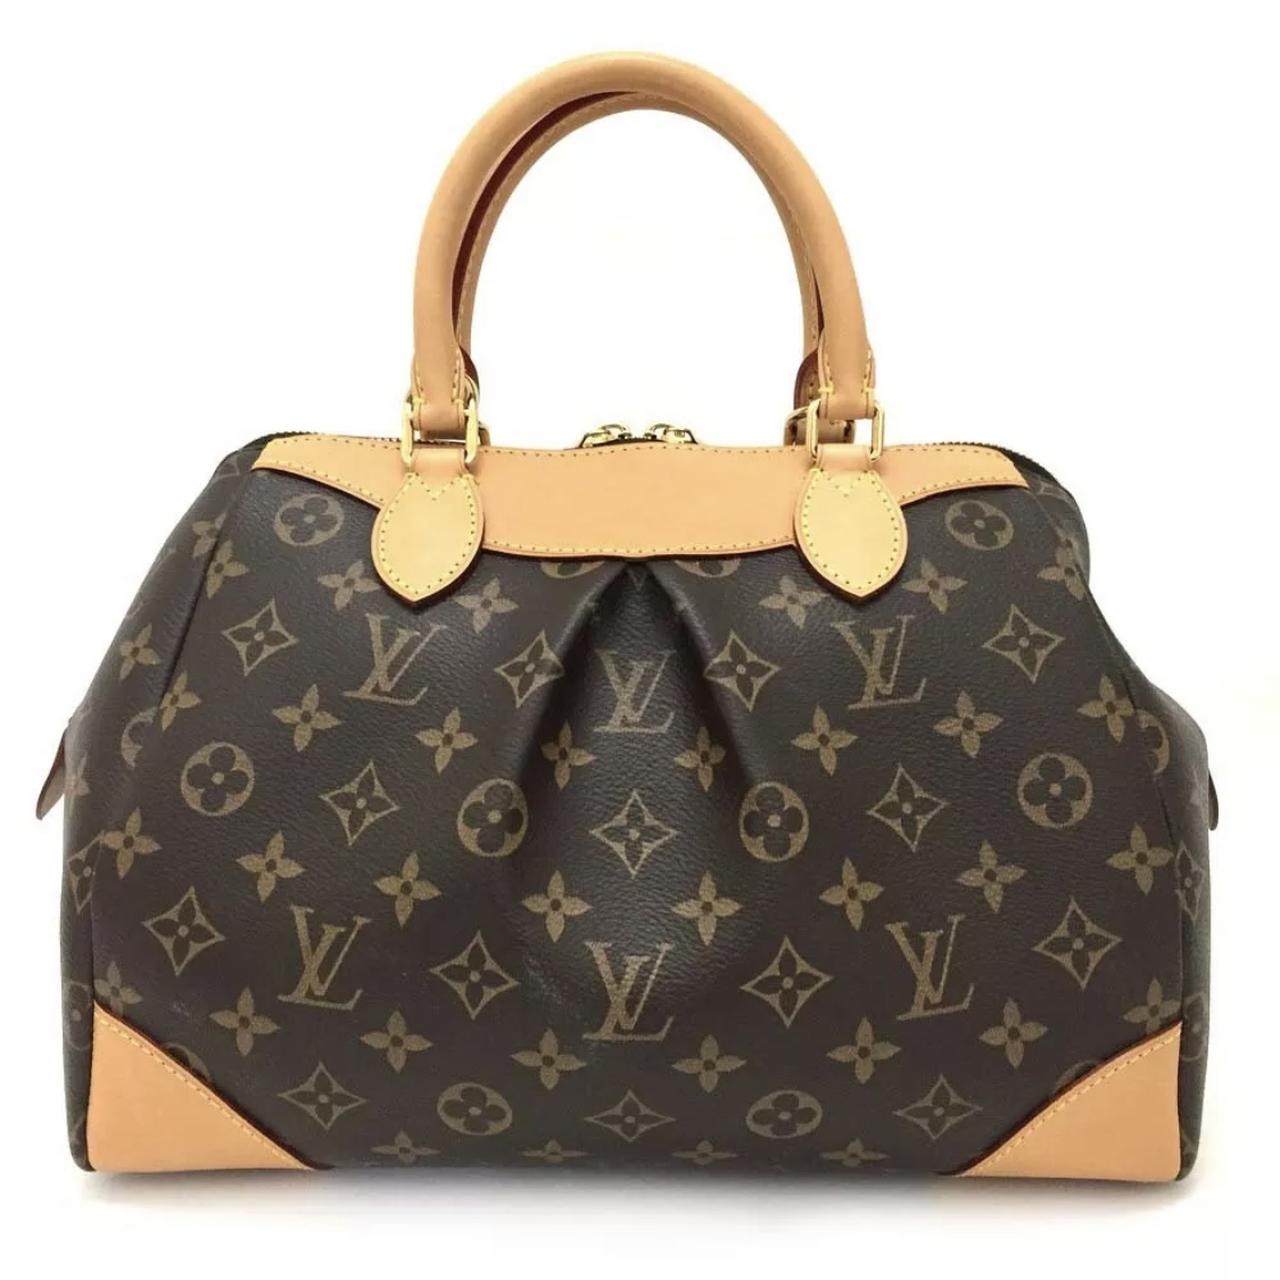 Louis Vuitton Pre-owned Women's Synthetic Fibers Handbag - Brown - One Size